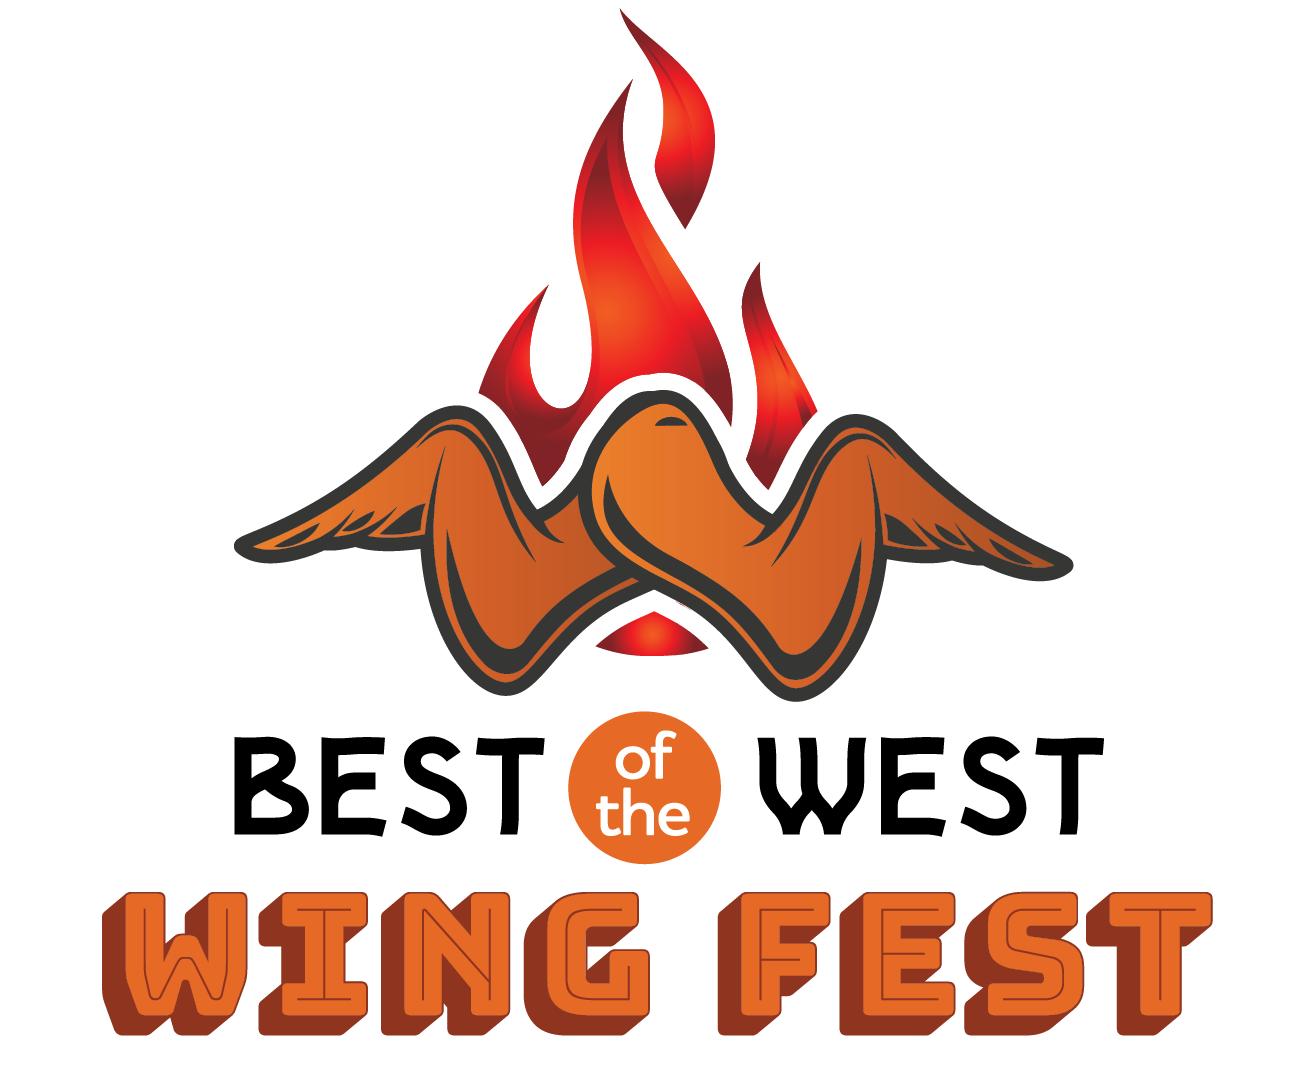 Best of the West Wing Festival logo design by logo designer Neon Pig Creative for your inspiration and for the worlds largest logo competition